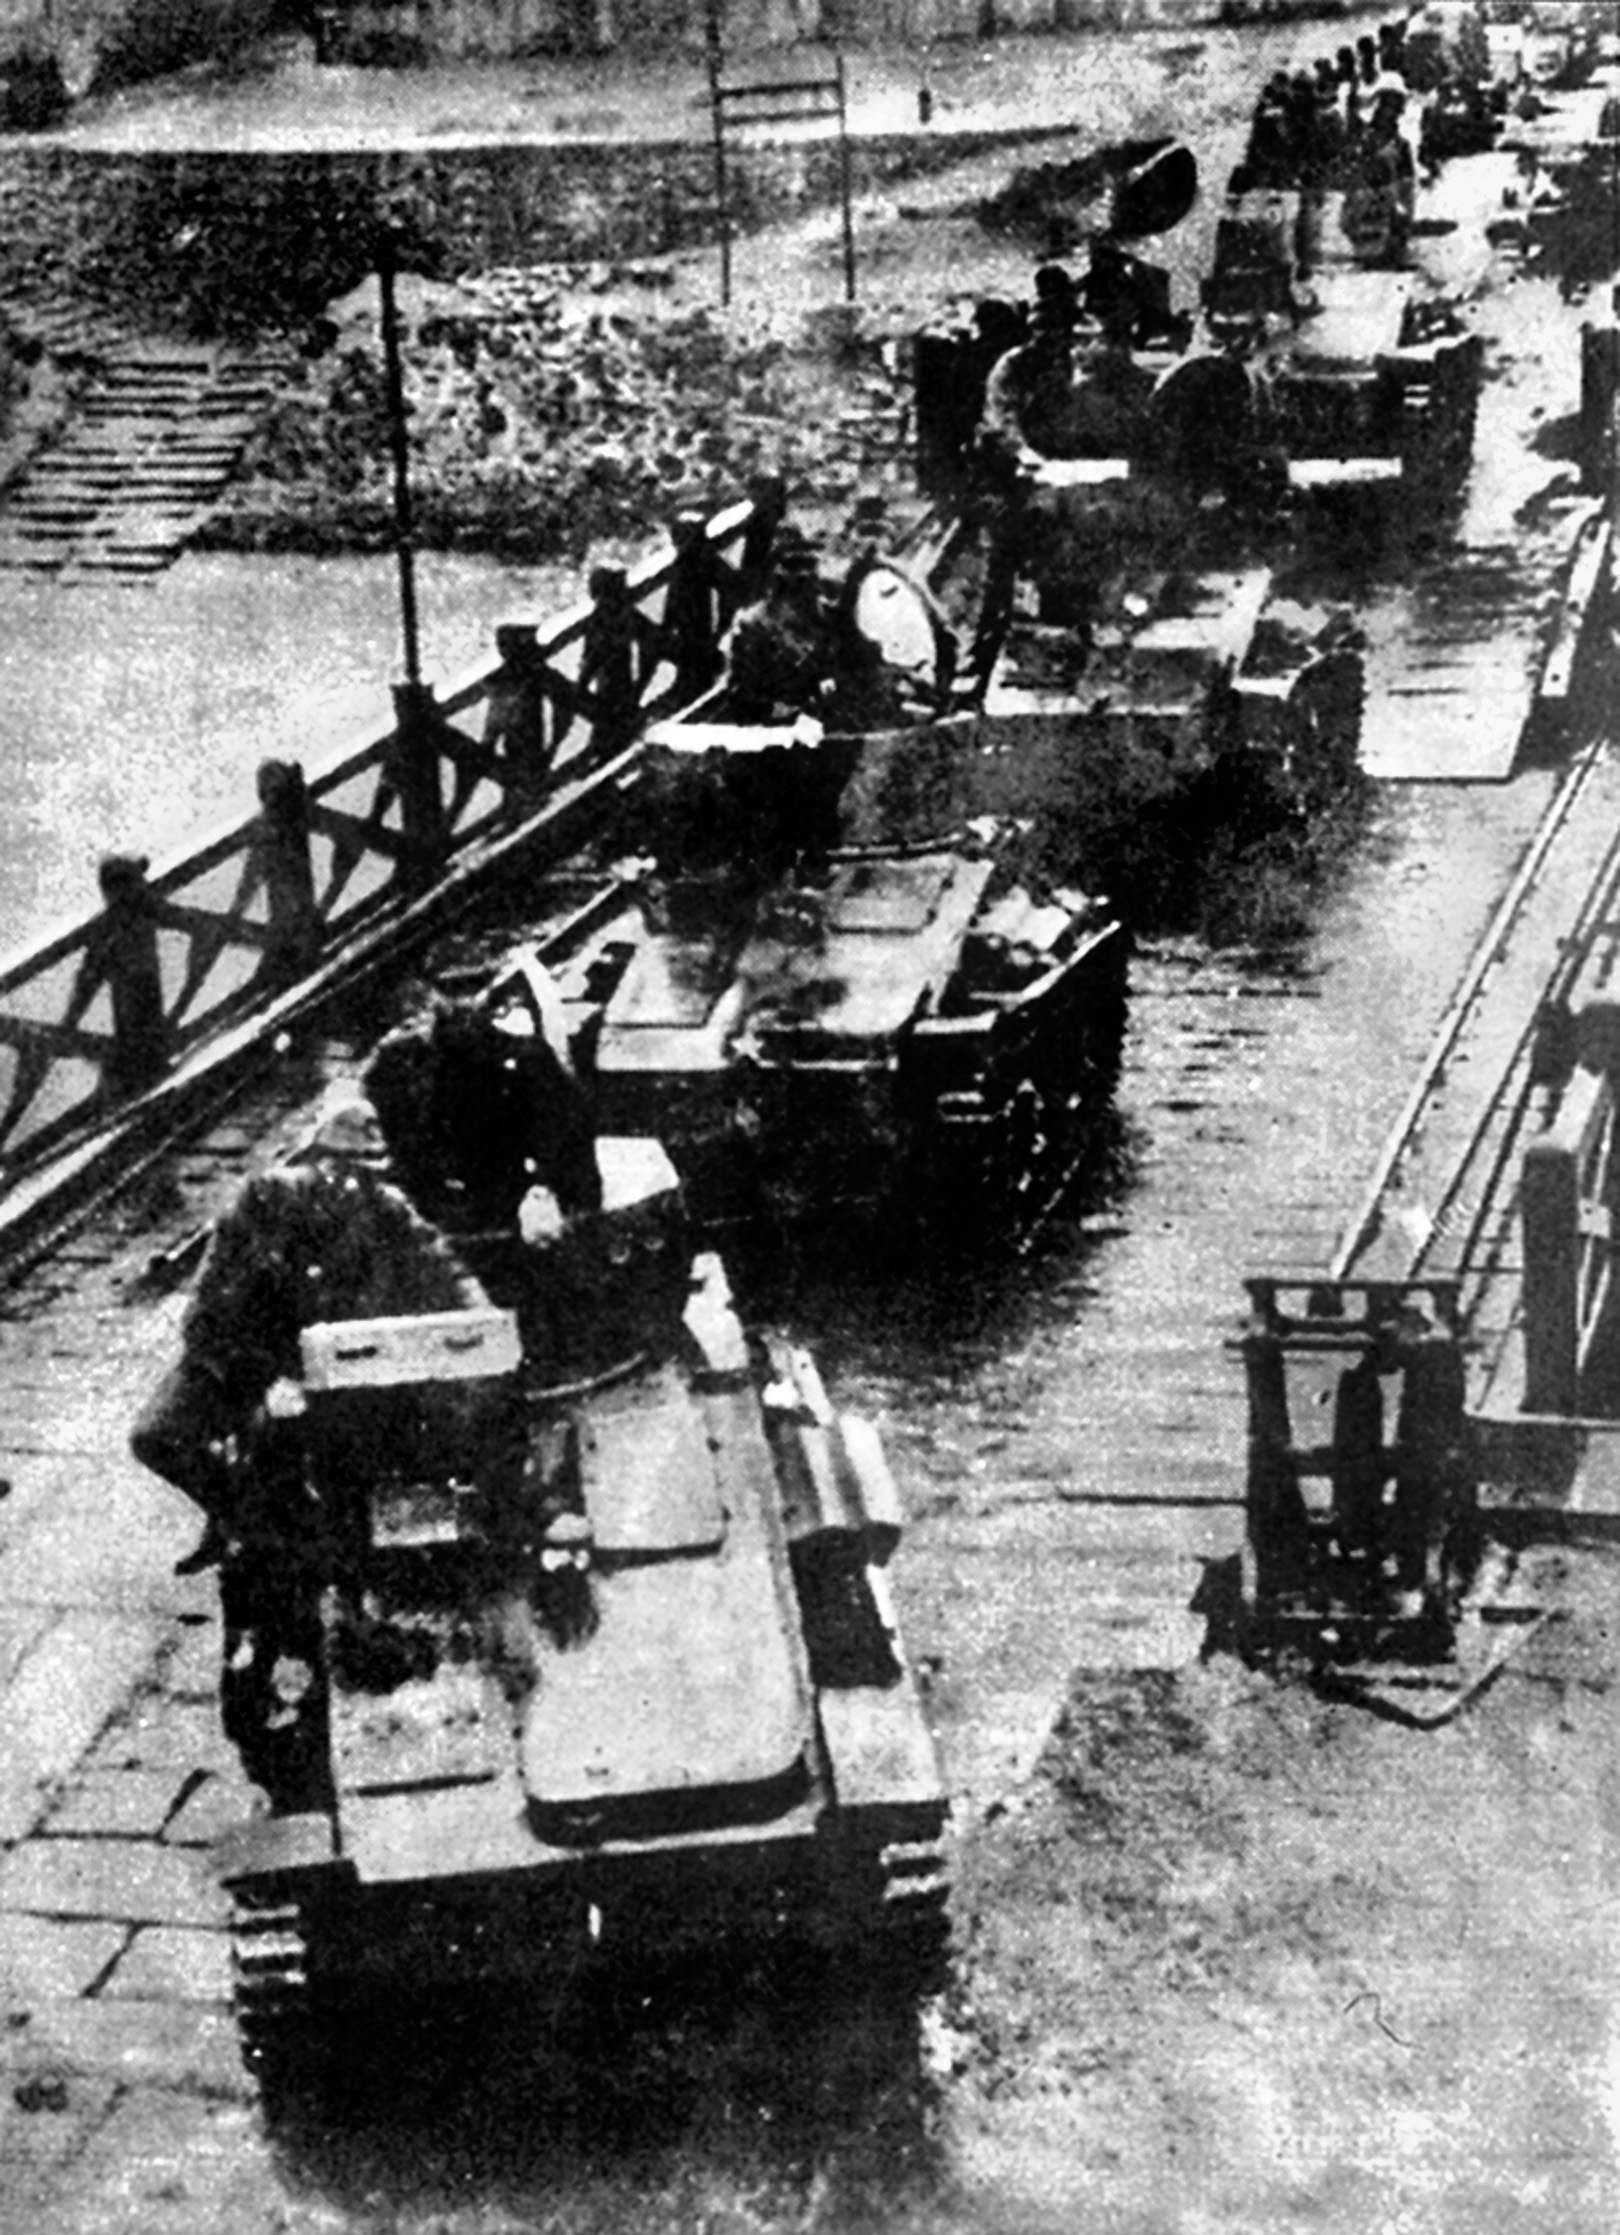 Although Japanese armor was deemed inferior to Western tanks and fighting vehicles, the spearheads of Yamashita’s conquering army in Malaya did include some armored formations. The British and Commonwealth defenders of Singapore, however, had no tanks at all to counter the strength of Japanese armor, a contingent of which is shown crossing a river.